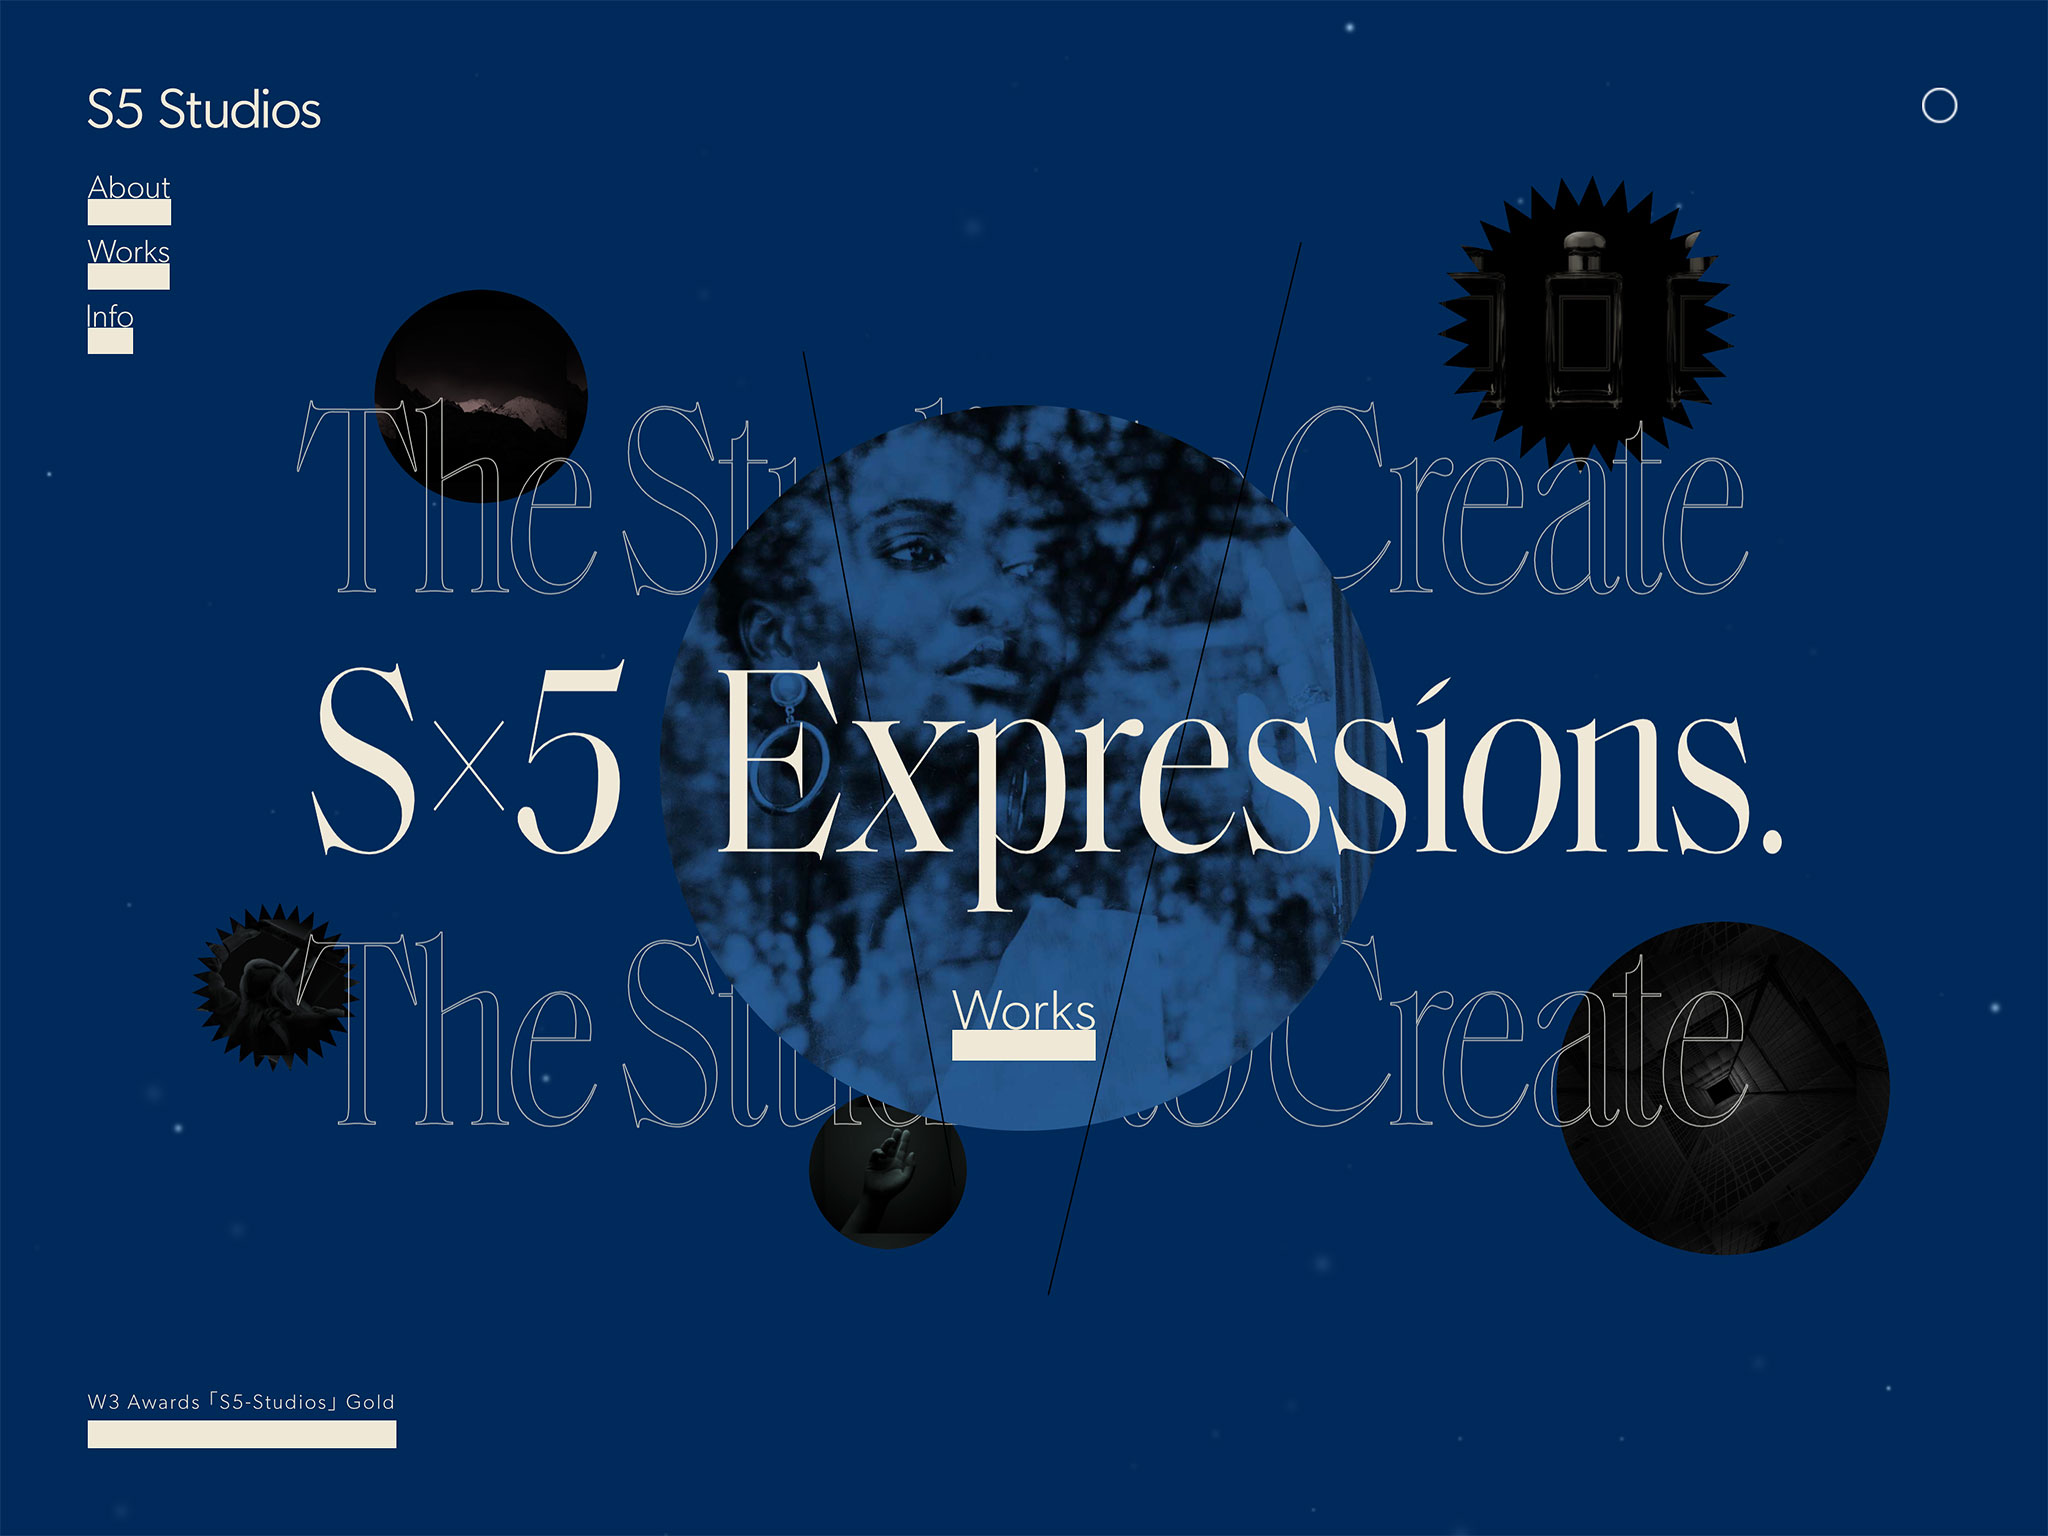 S5-Studios — The Studio to Create S×5 Expressions.